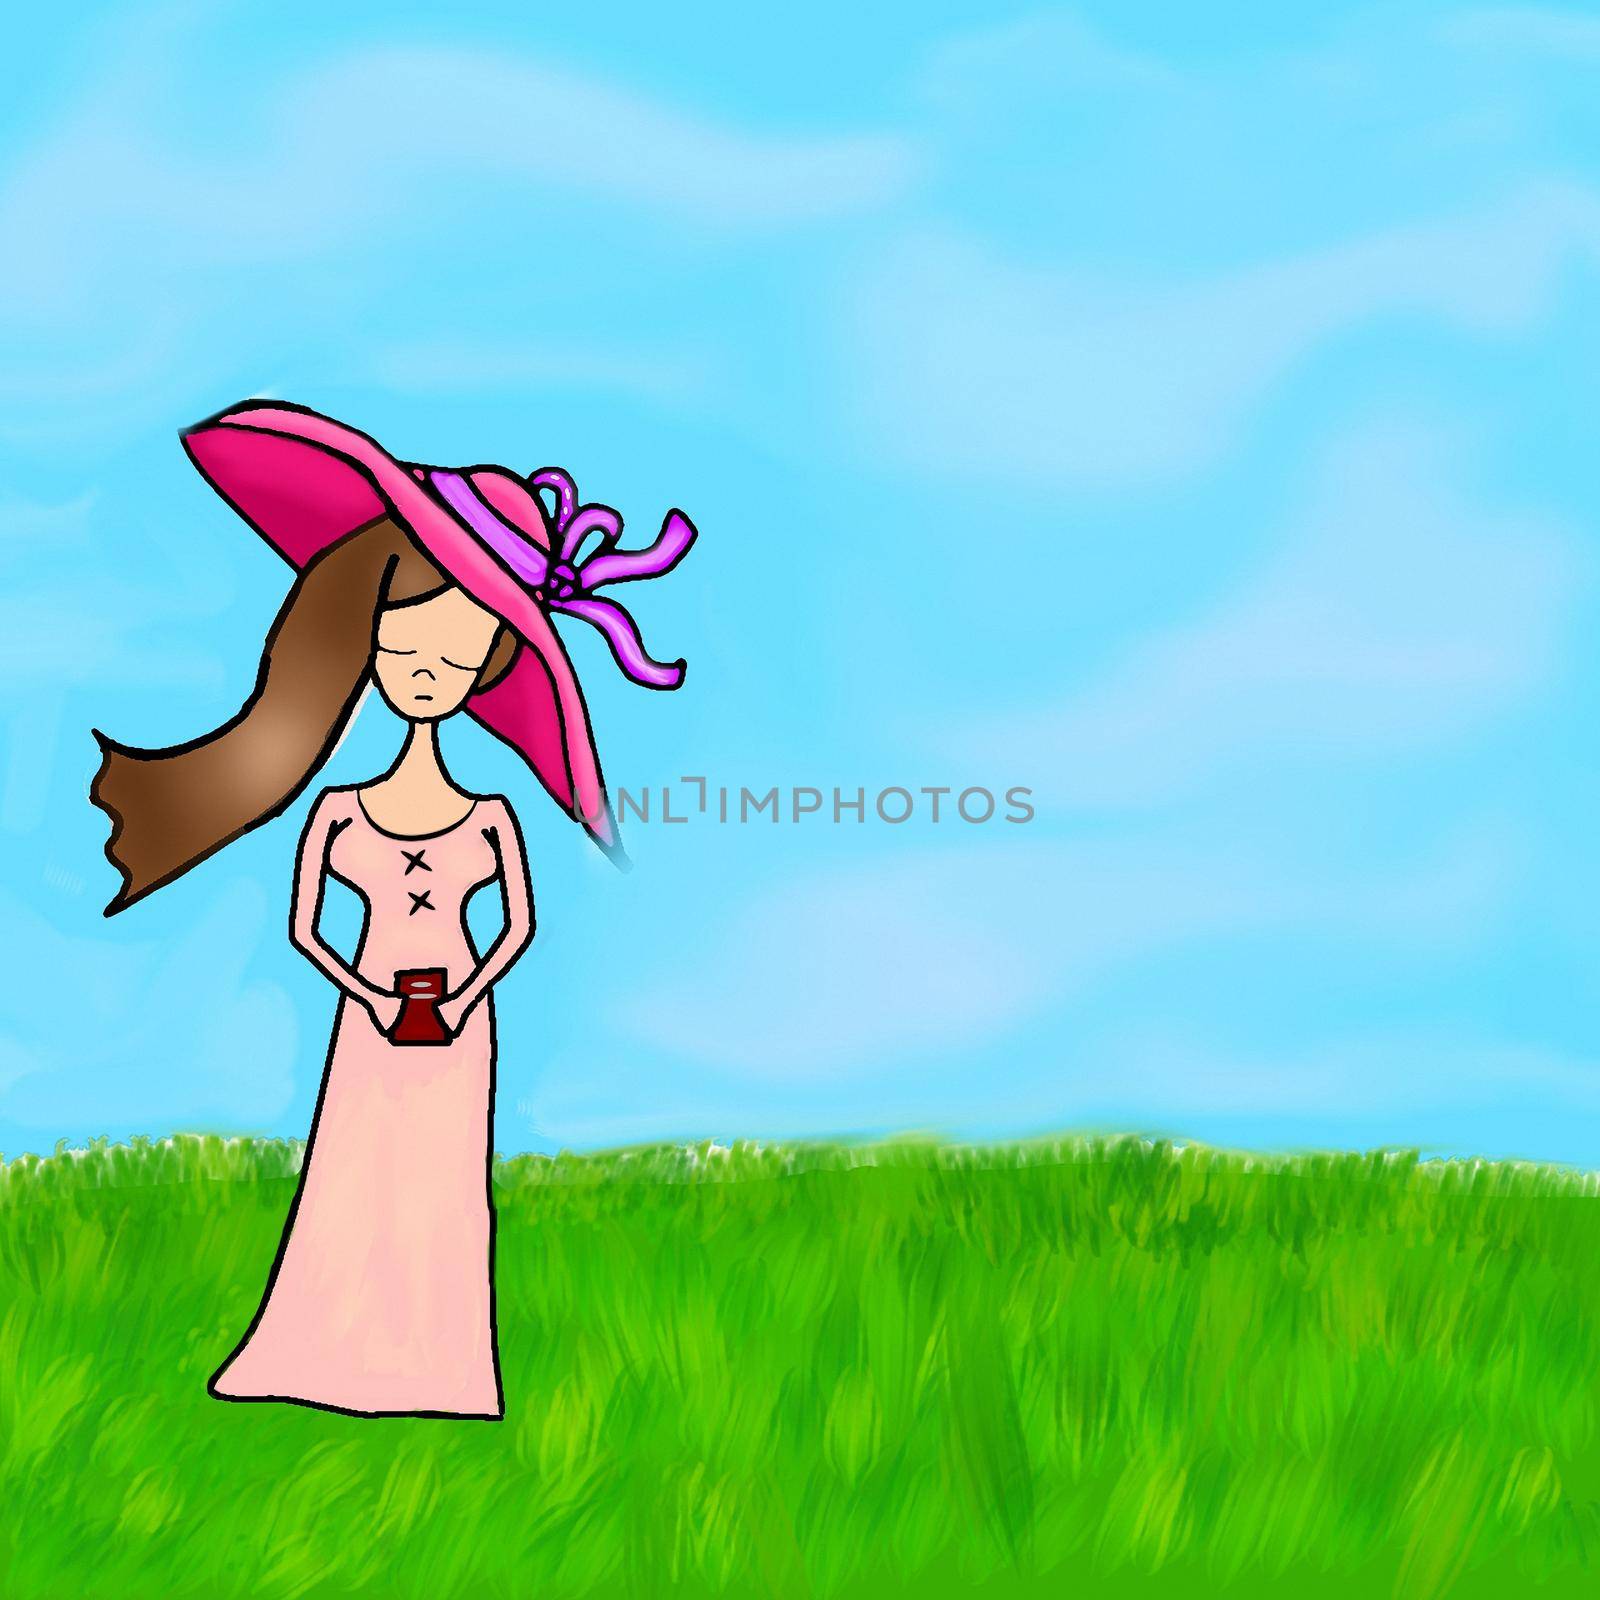 Elegant intelligent cartoon lady in vintage style clothes on the field in summer